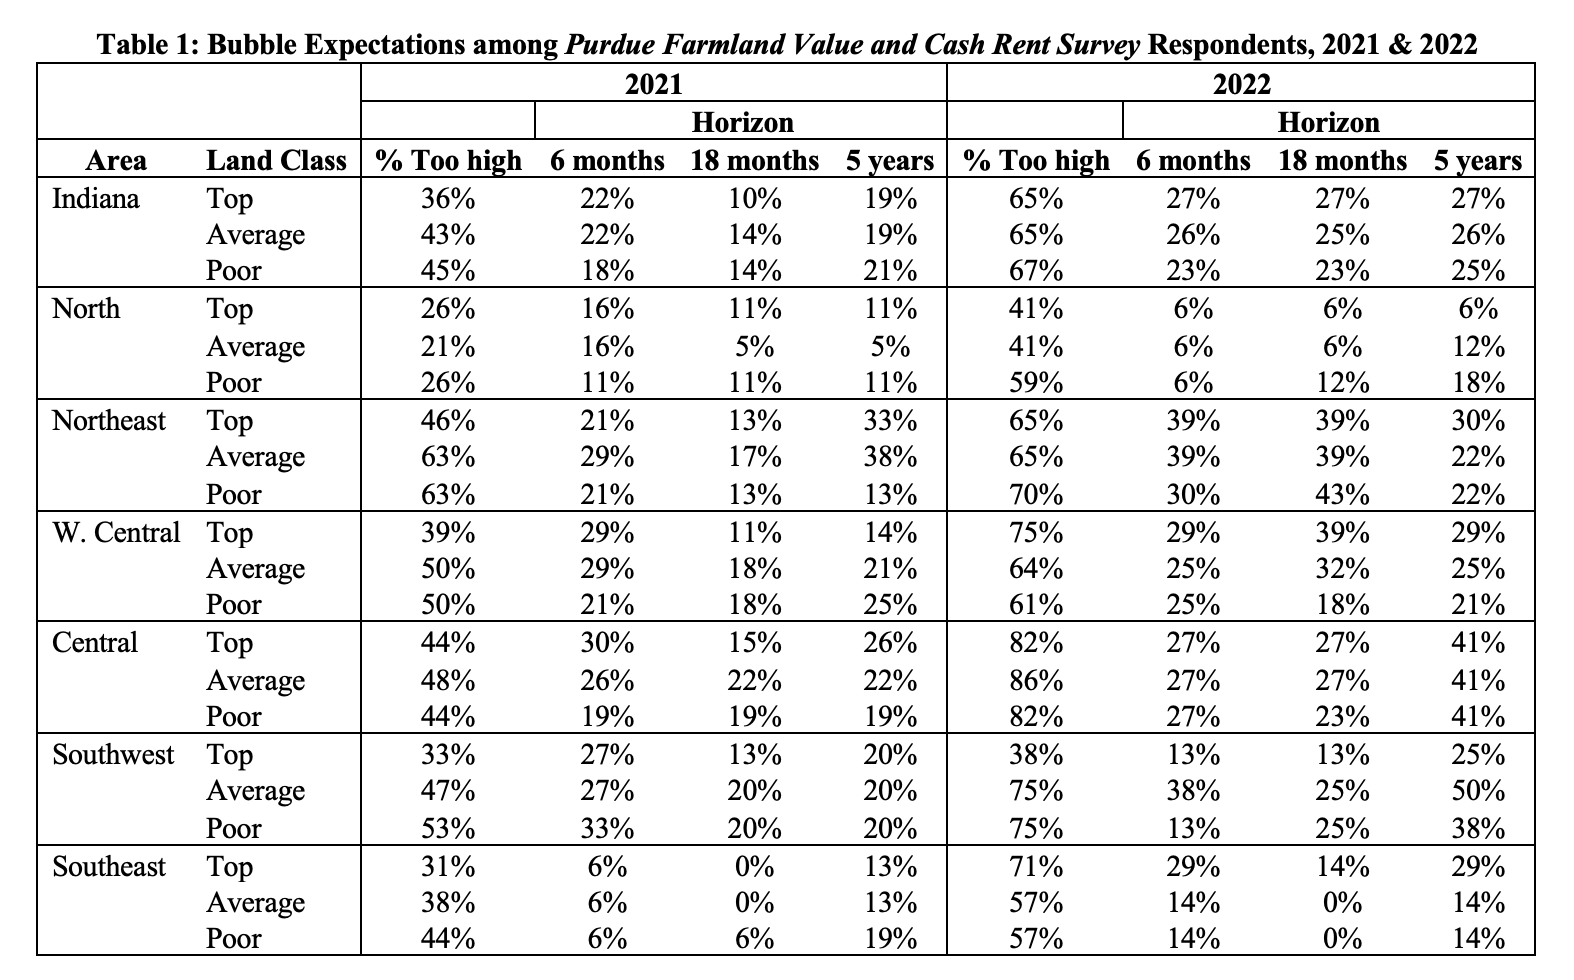 Table 1: Bubble Expectations among Purdue Farmland Value and Cash Rent Survey Respondents, 2021 & 2022